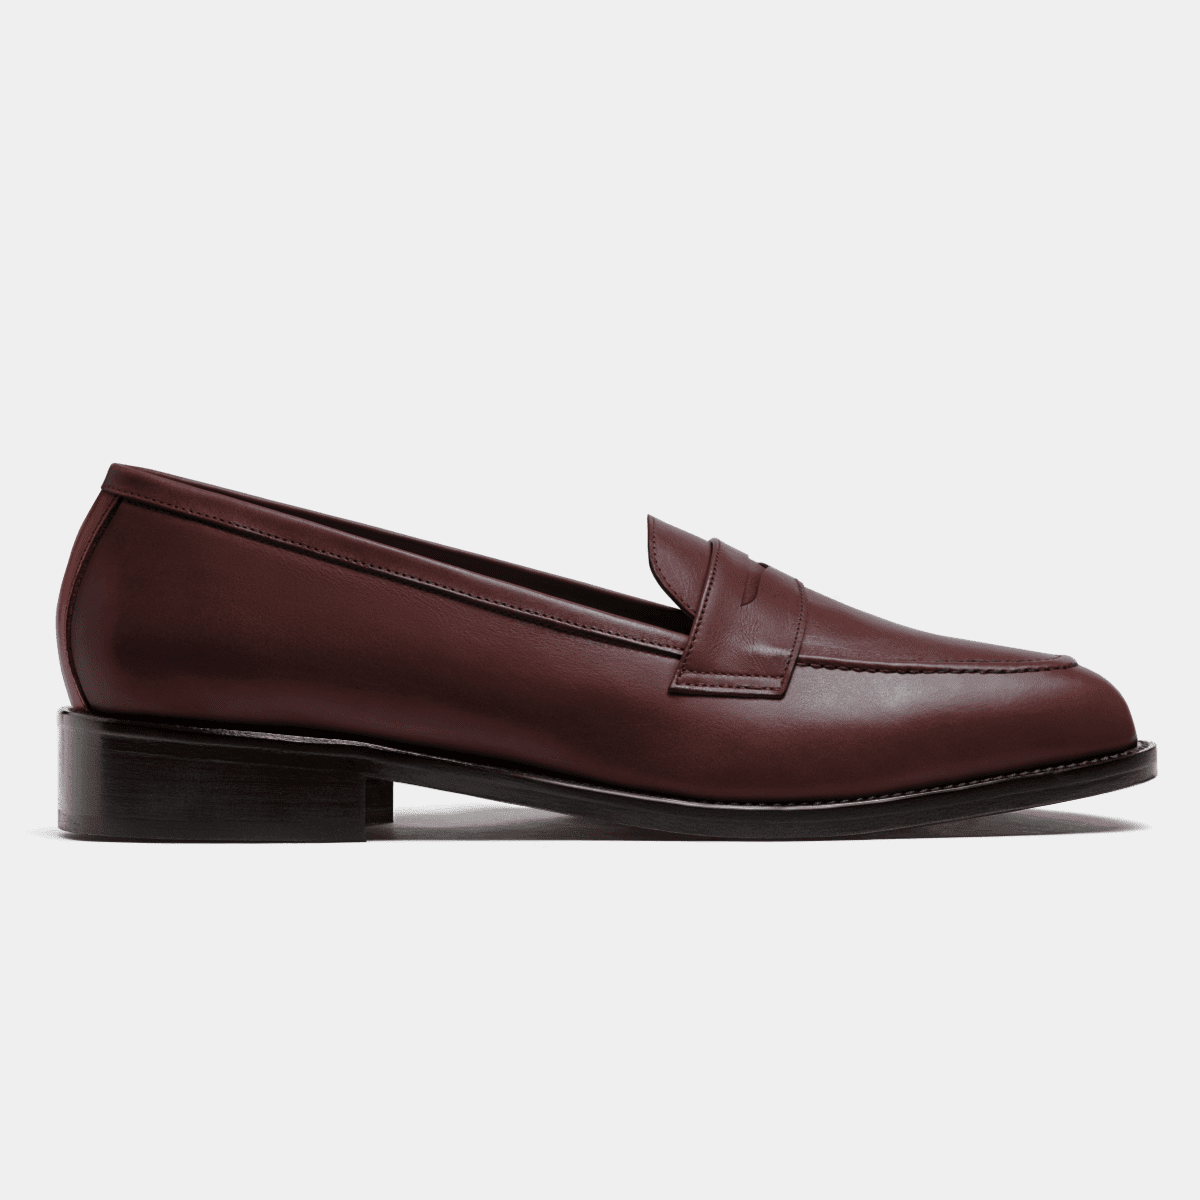 Penny Loafers - oxblood italian calf leather